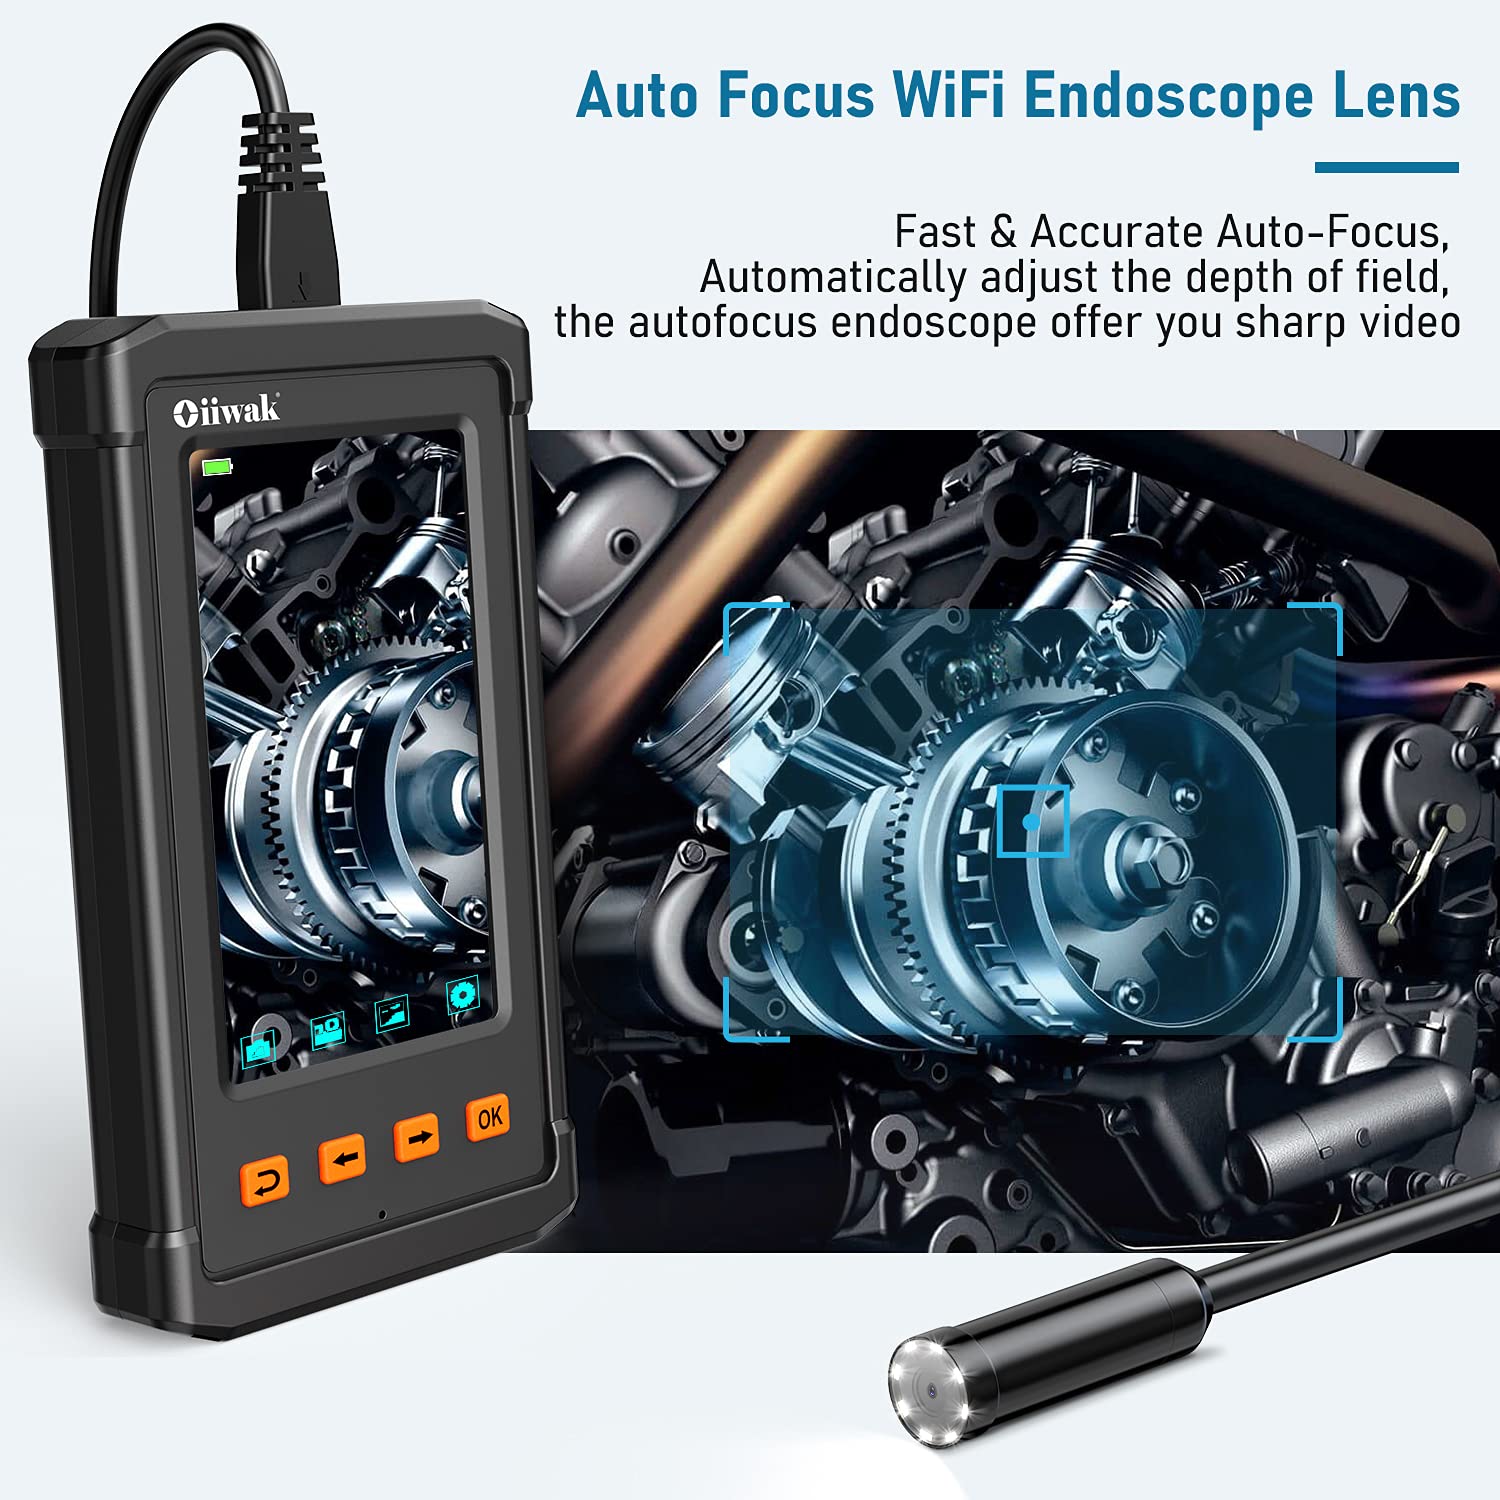 Lens IP67 Waterproof F240 3.9mm Wireless Endoscope Camera 10M for Electrical Maintenance,Drainage Pipelines Machinery Car Engine Maintenance Inspection Endoscope 